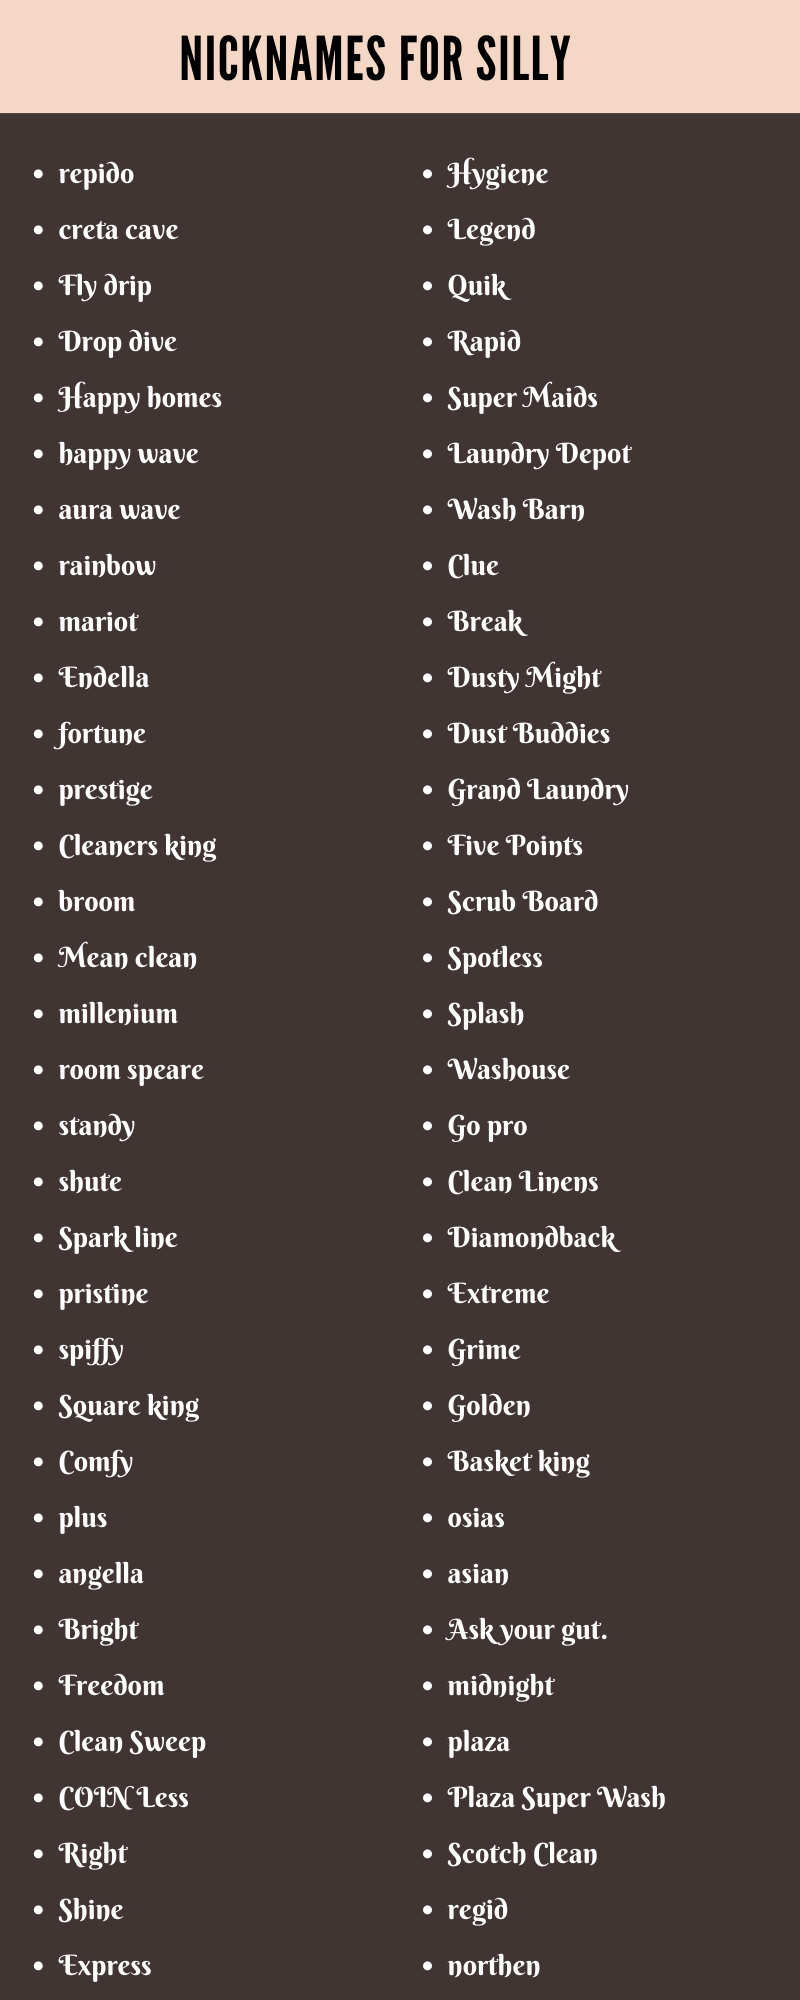 Nicknames for Silly